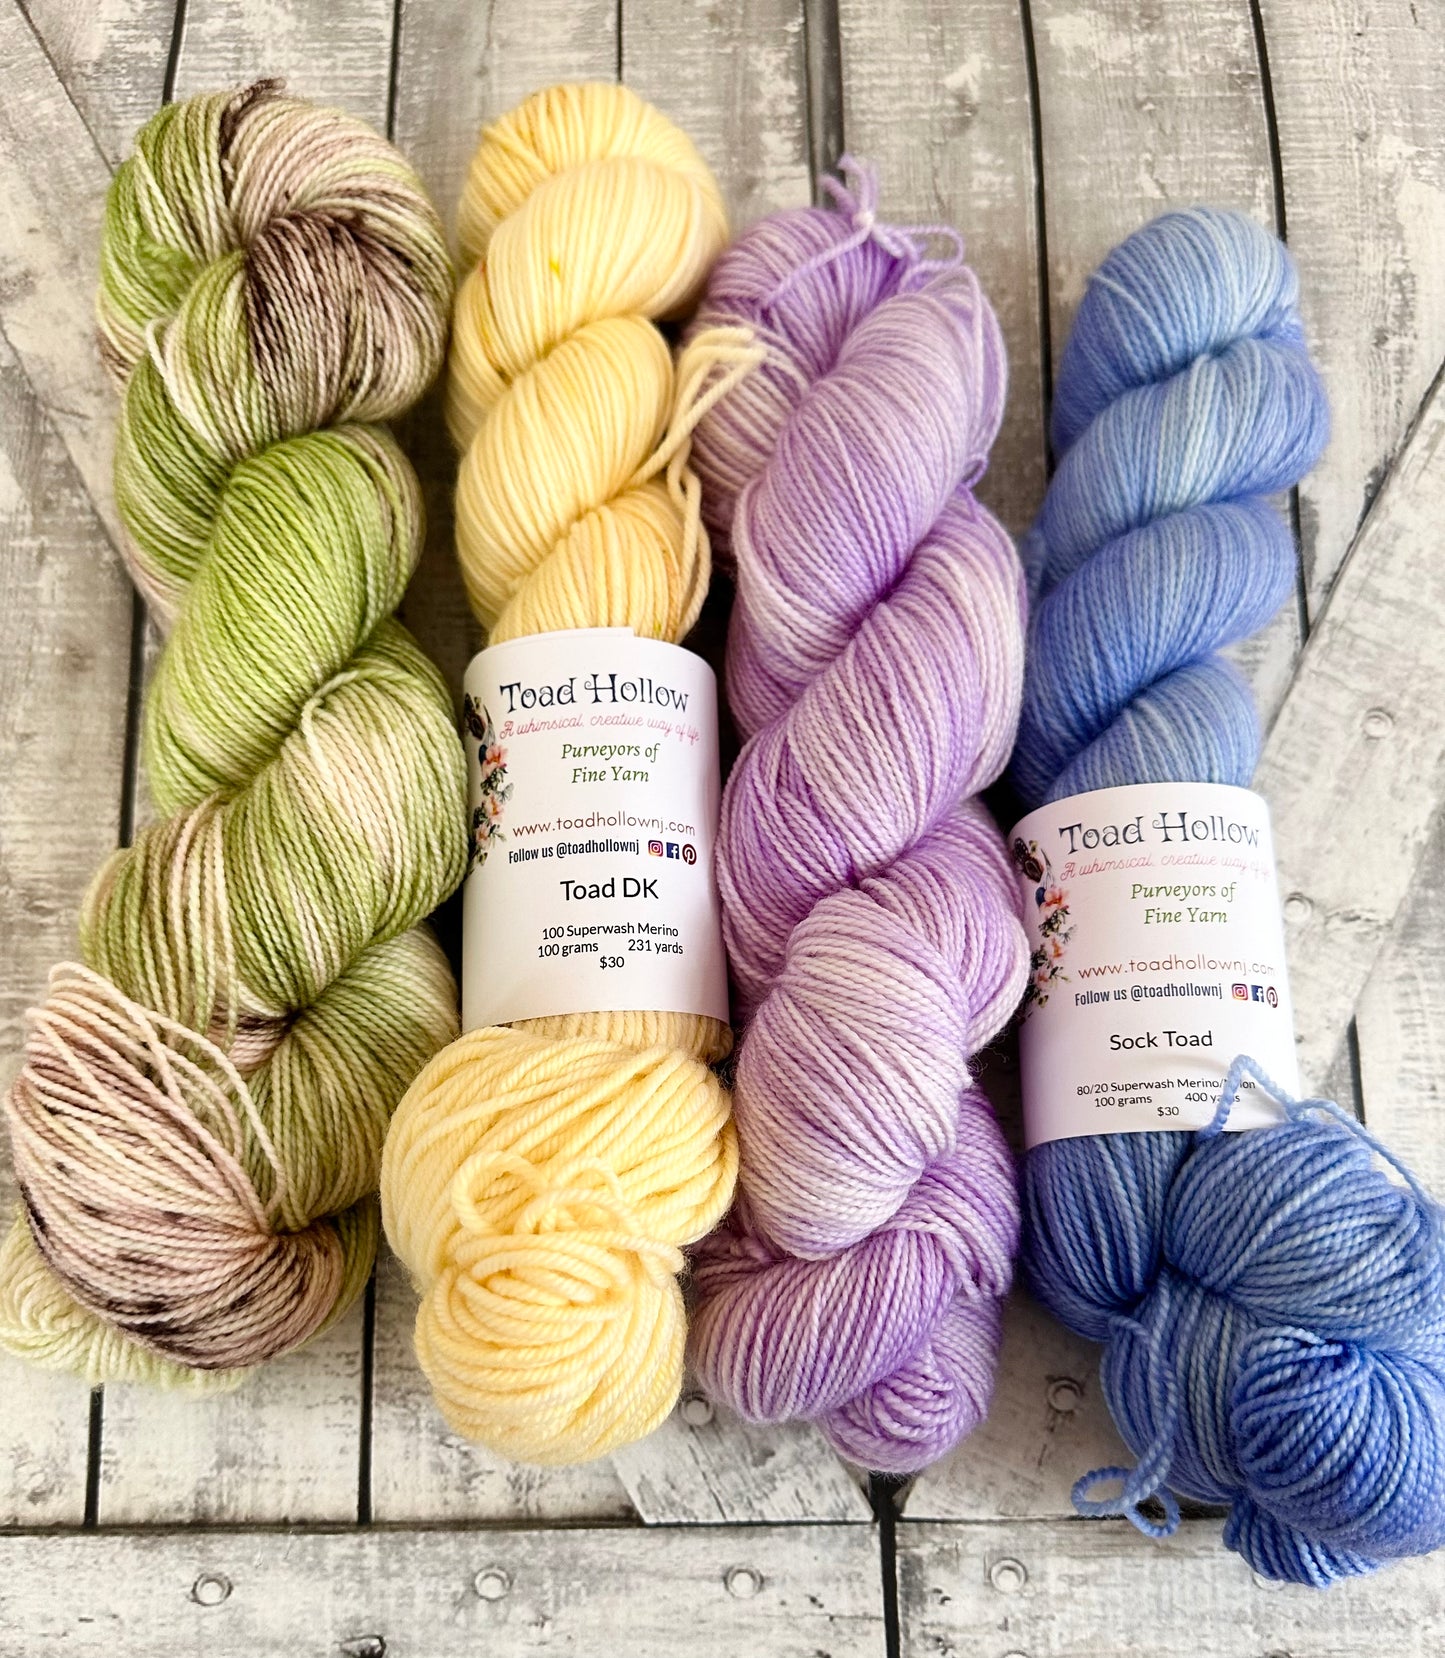 4 SKEIN KIT 1, perfect for shawls and sweaters, Toad Hollow Yarns